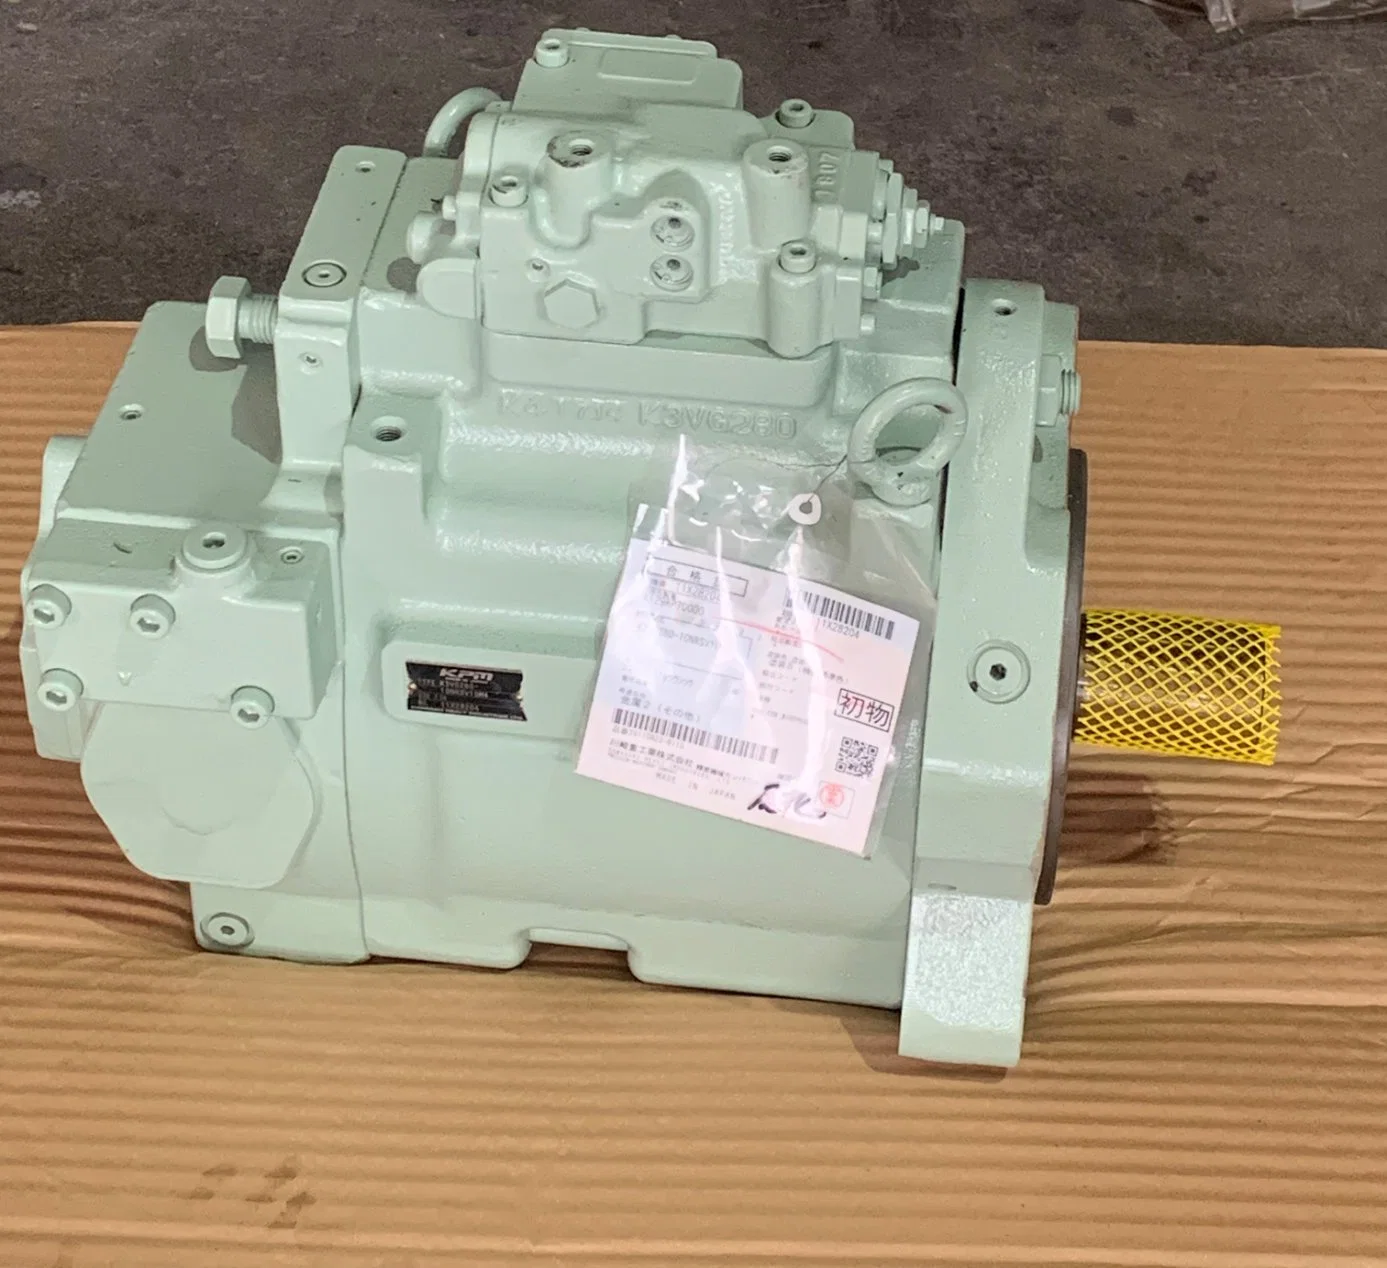 Excavator Hydraulic Pump Parts K3vg280 Used for Winding Plant Rotary Drilling Rig Construction Plunger Pump K3vg Series